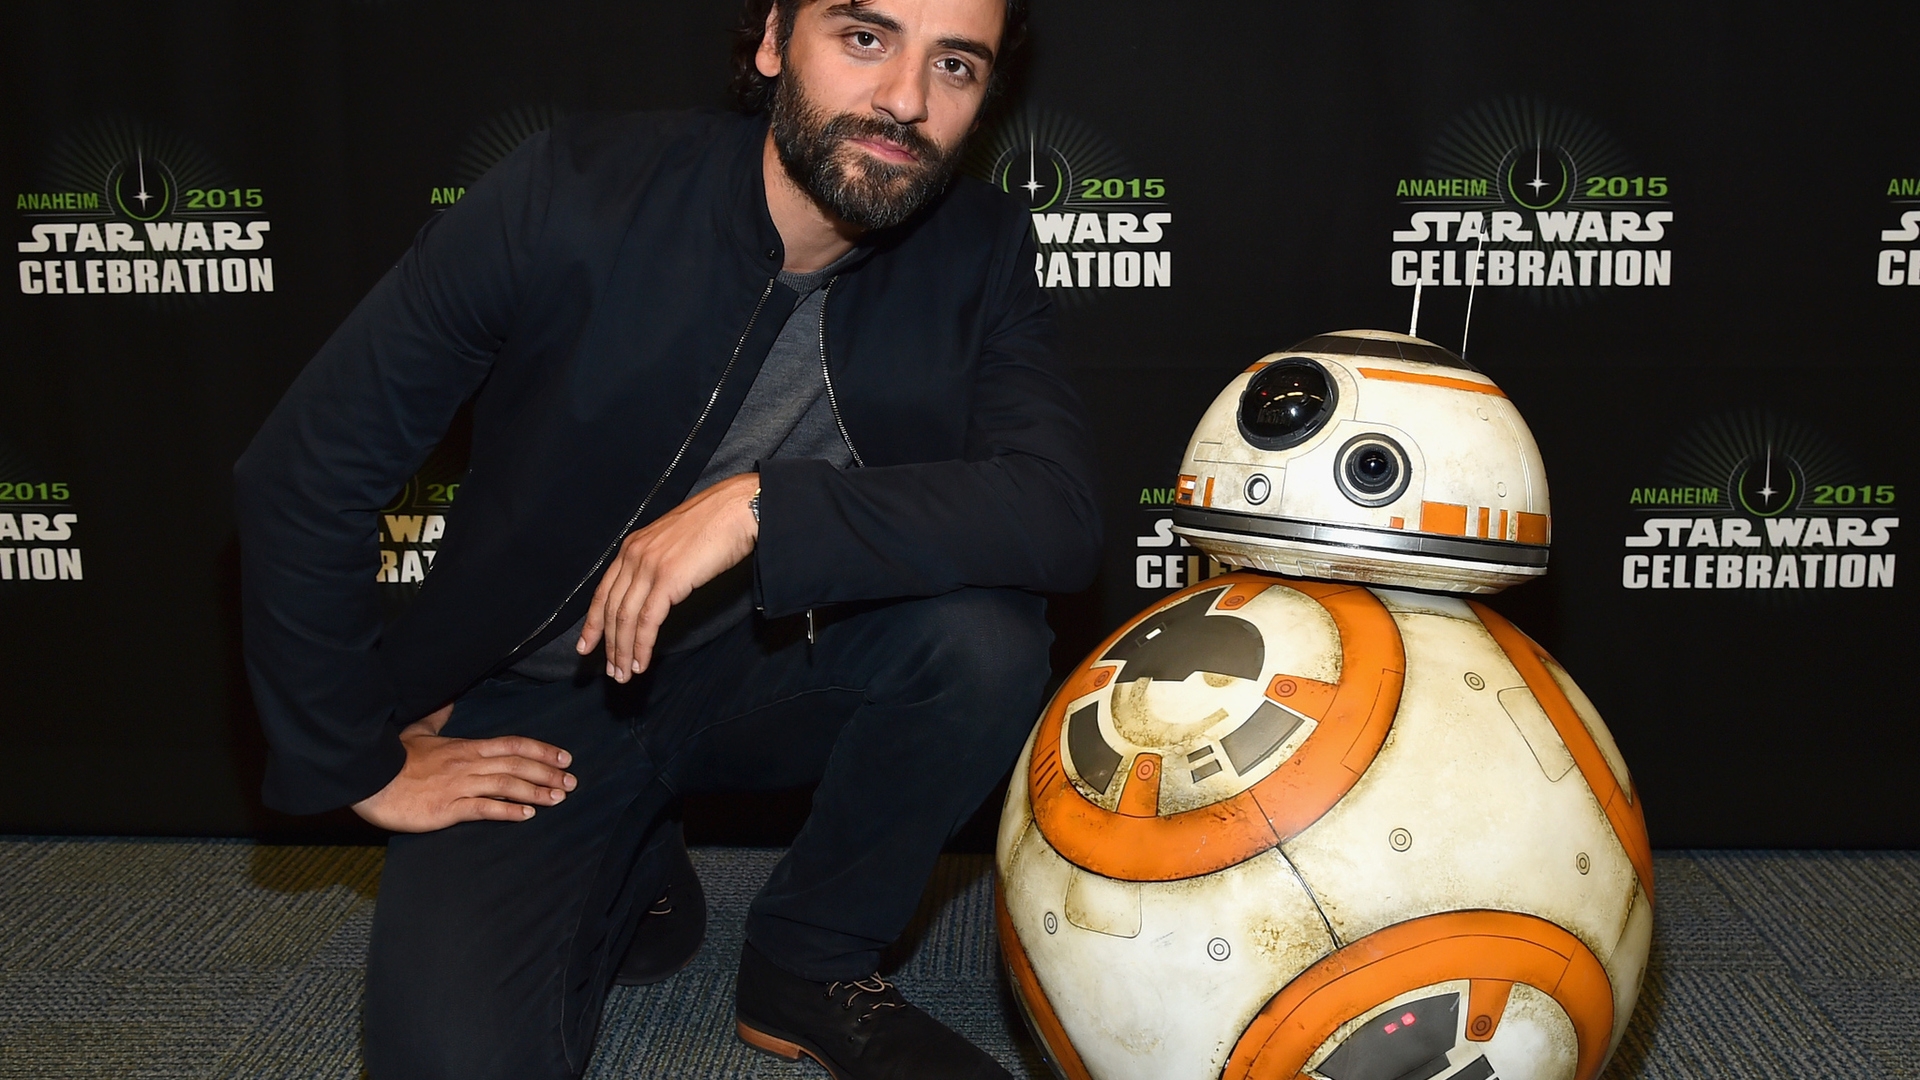 Star Wars The Force Awakens Oscar Isaac for 1920 x 1080 HDTV 1080p resolution